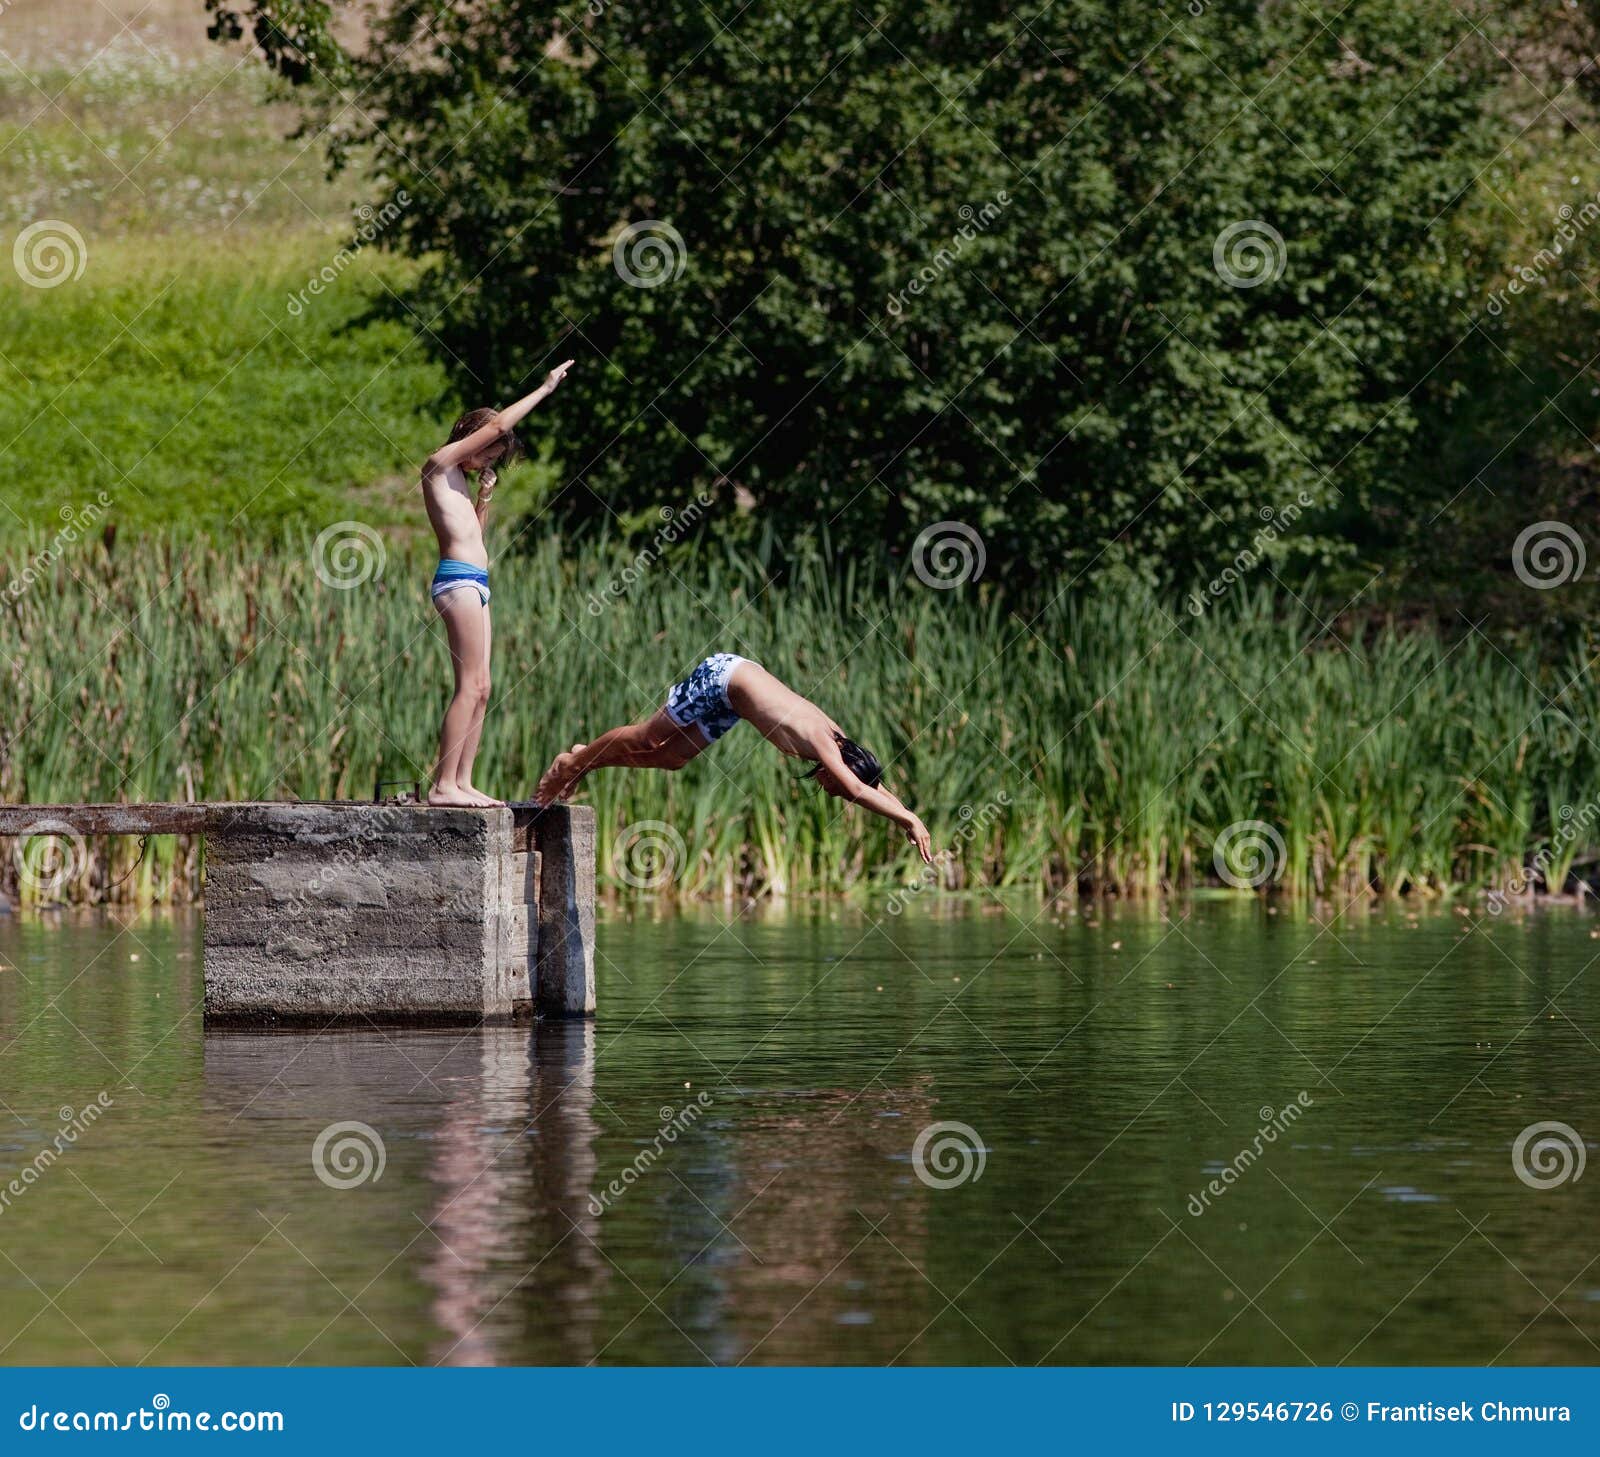 Two Boys Diving In The Lake Stock Photo Image Of Long Water 129546726